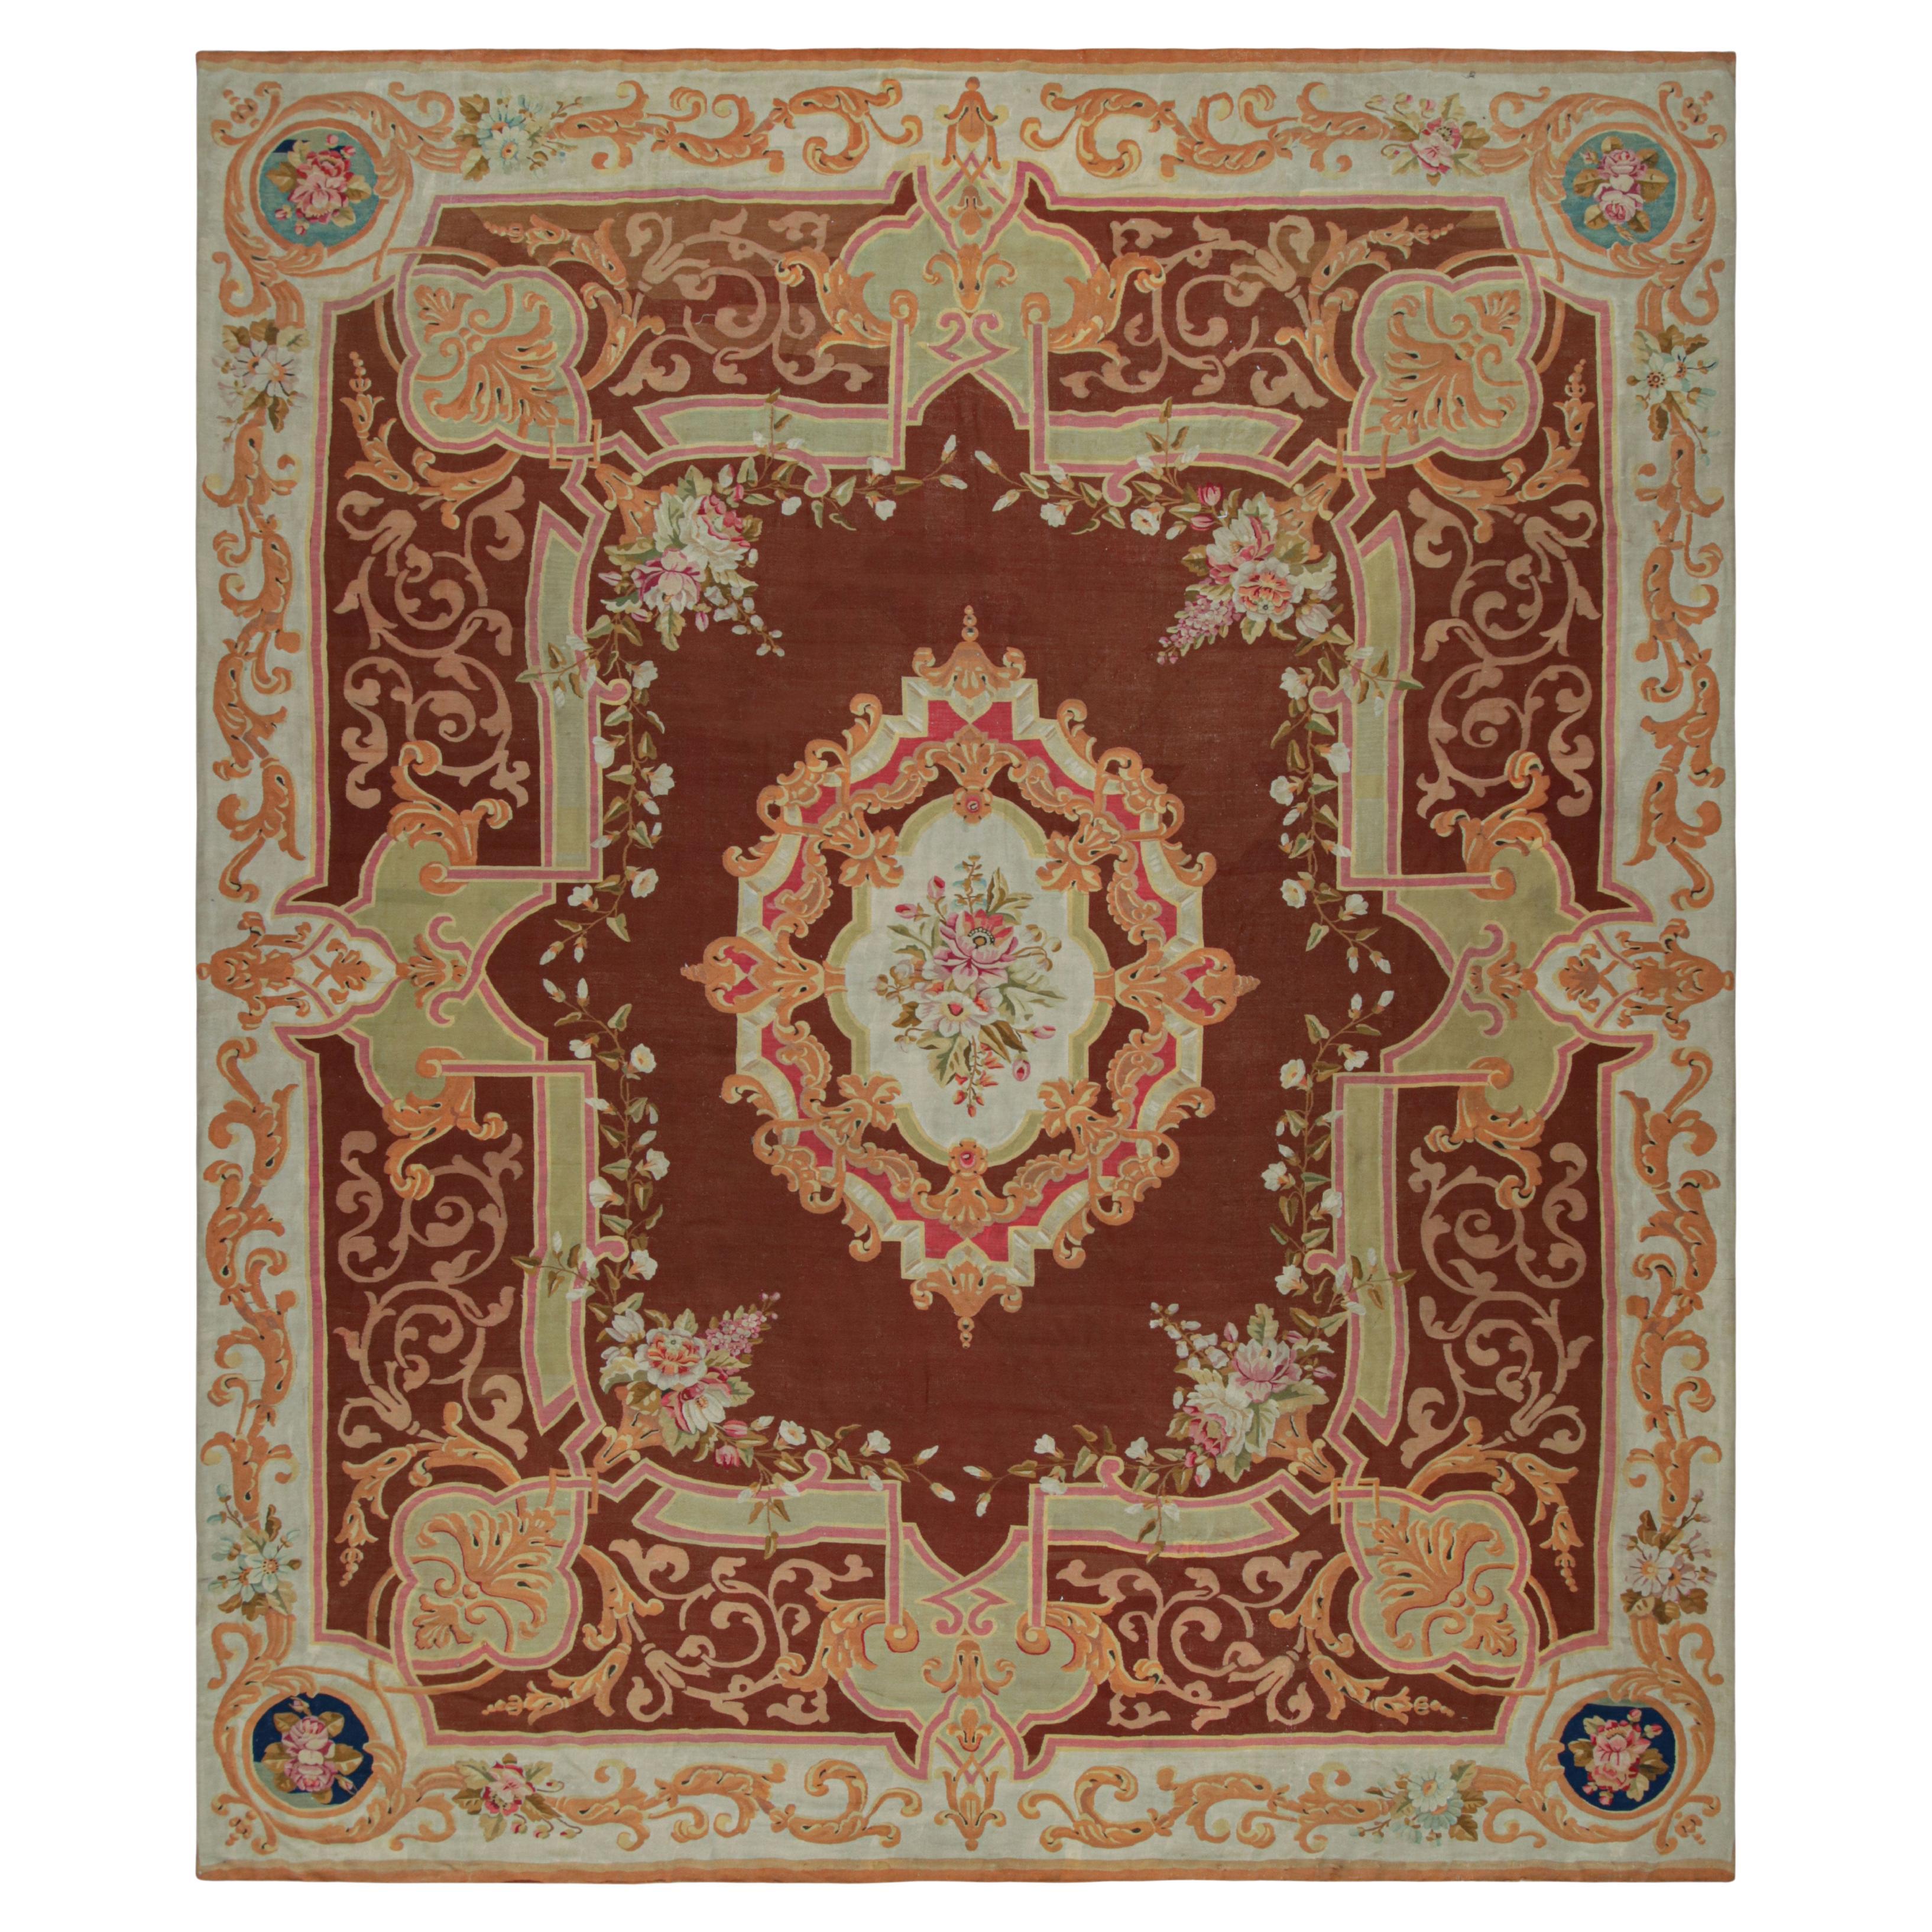 Antique Aubusson Rug in Brown with Floral Medallion, from Rug & Kilim